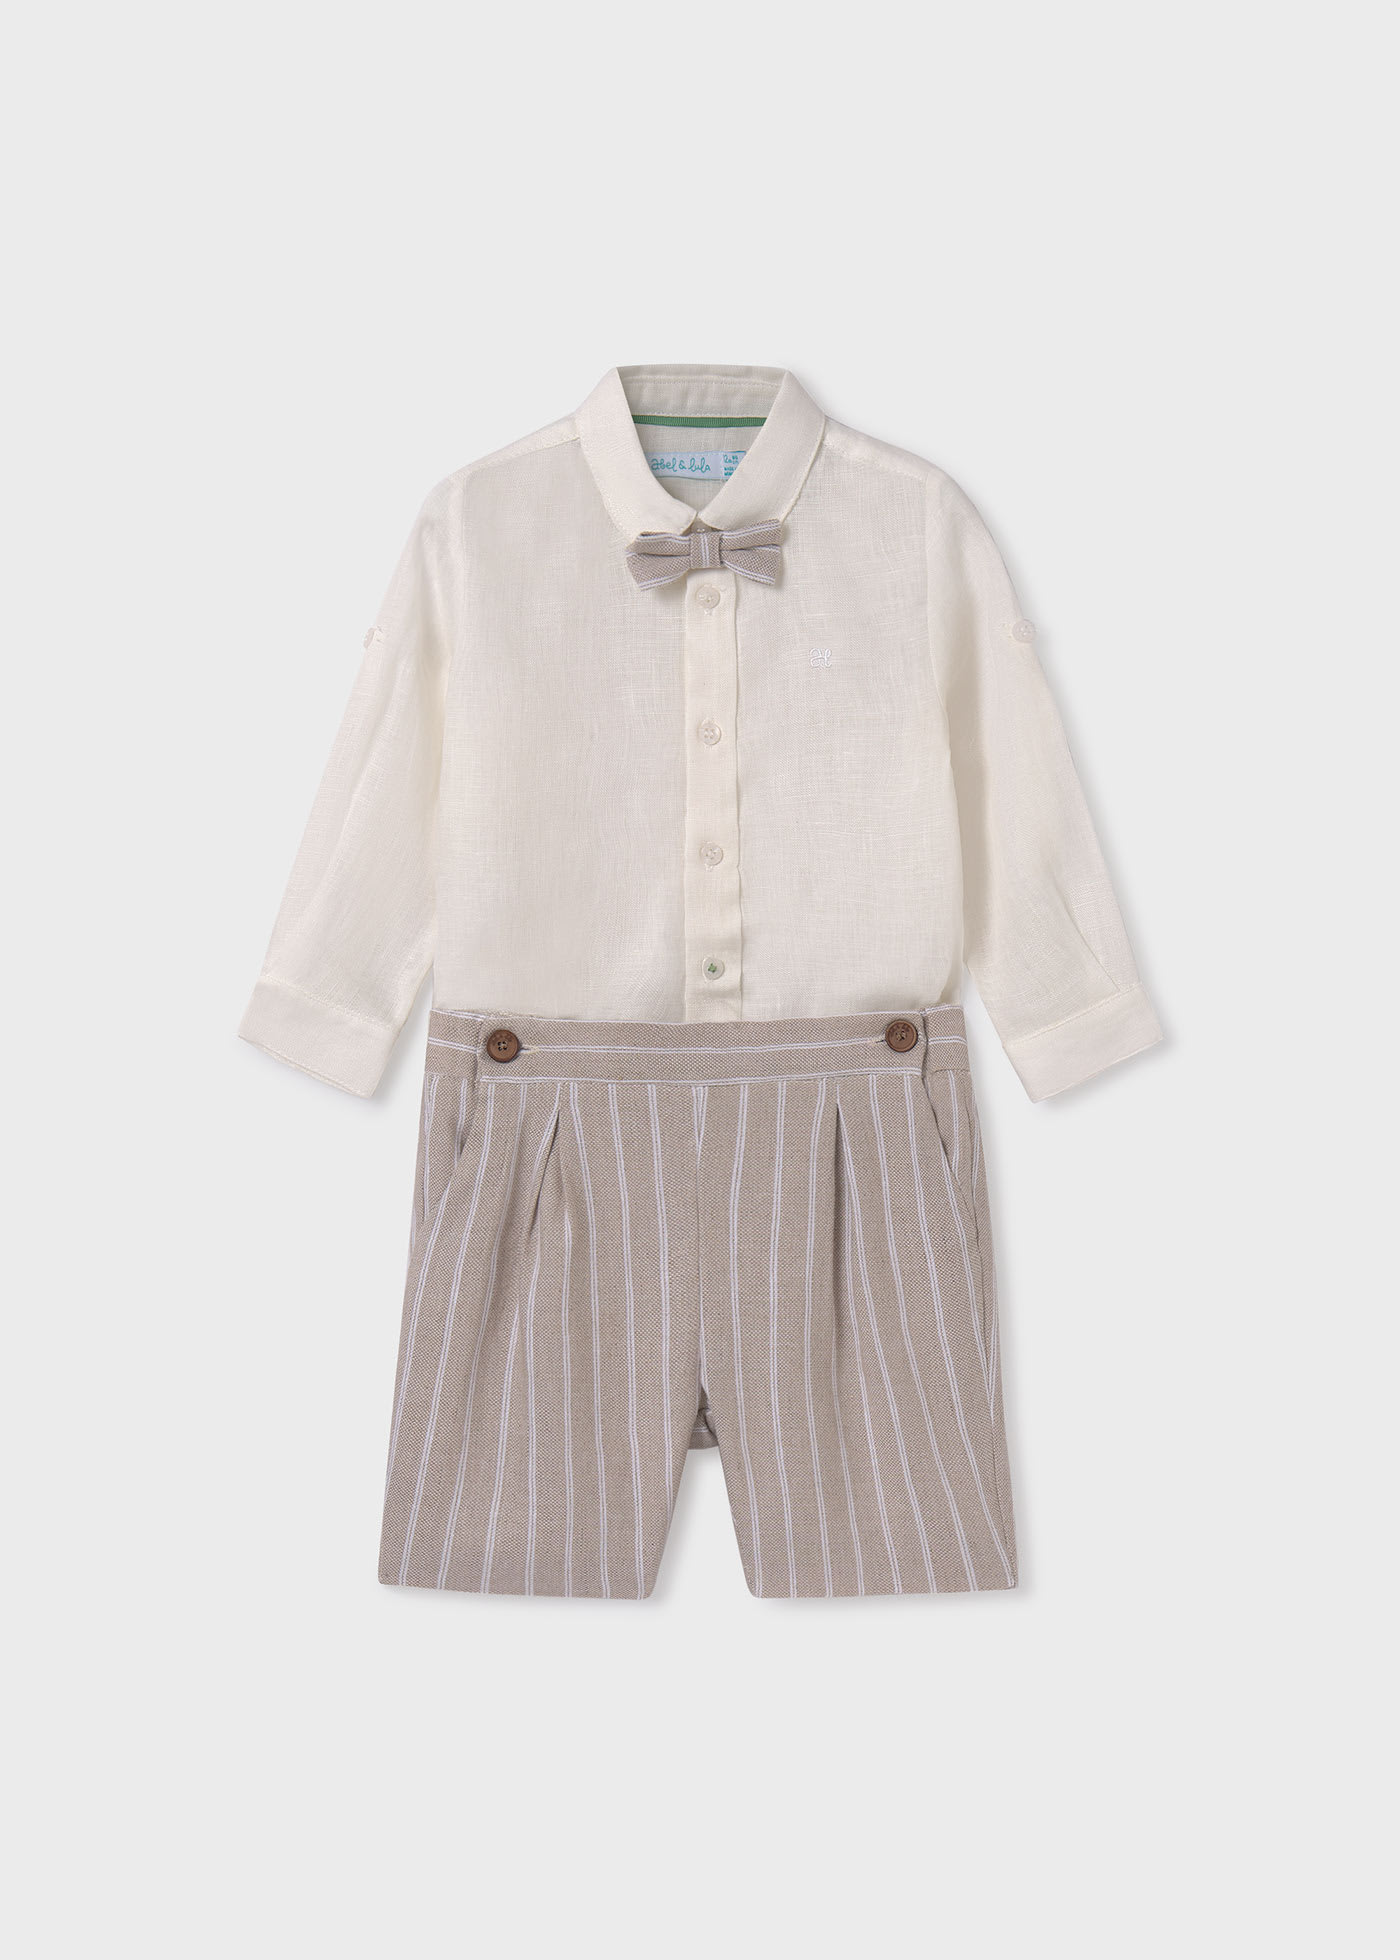 Boy set of linen shirt with bow tie and shorts